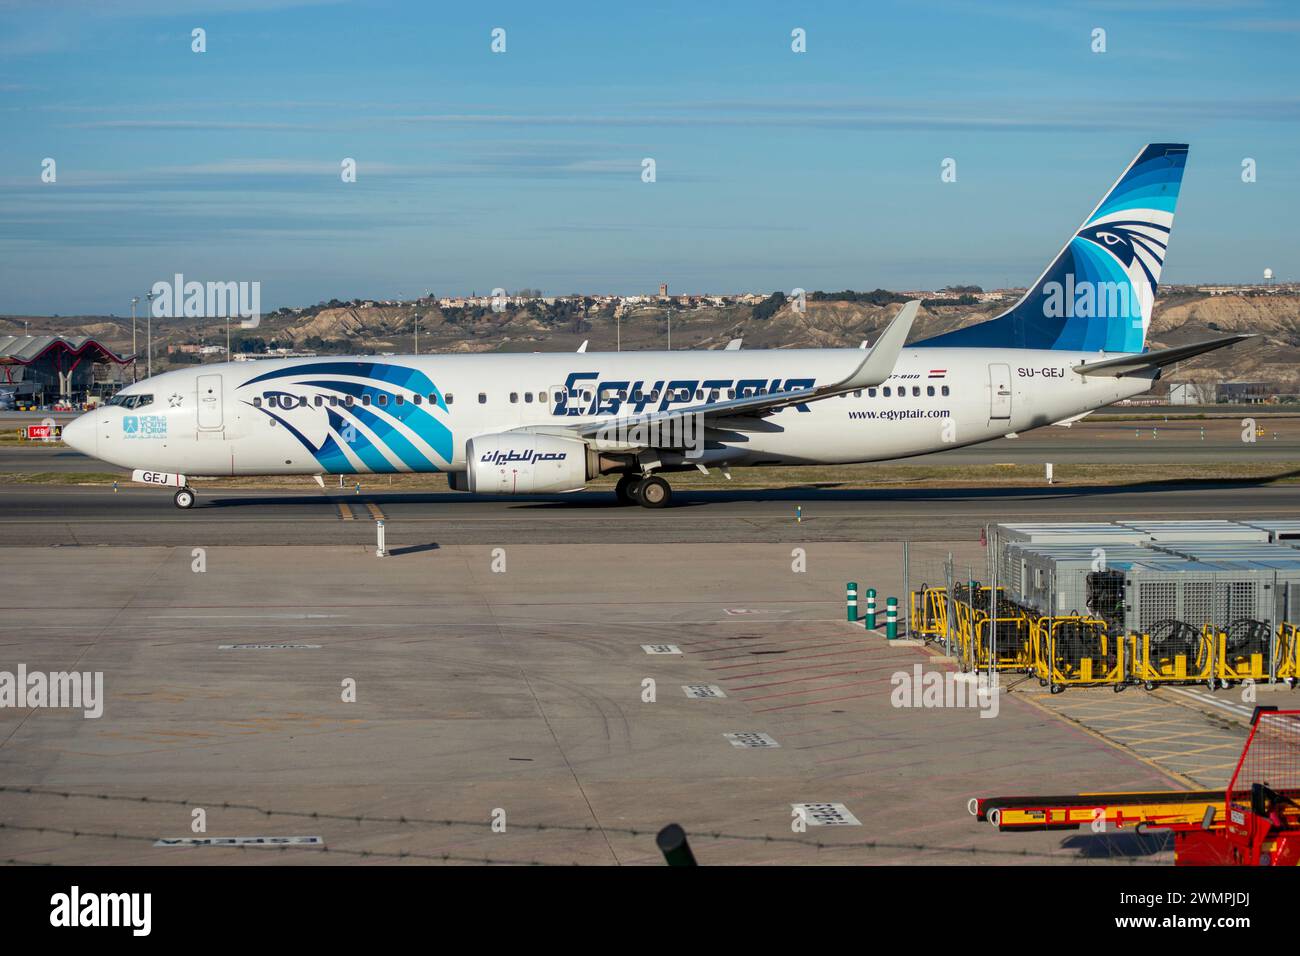 Boeing 737 airliner of the Egyptair airline at Madrid Barajas airport Stock Photo